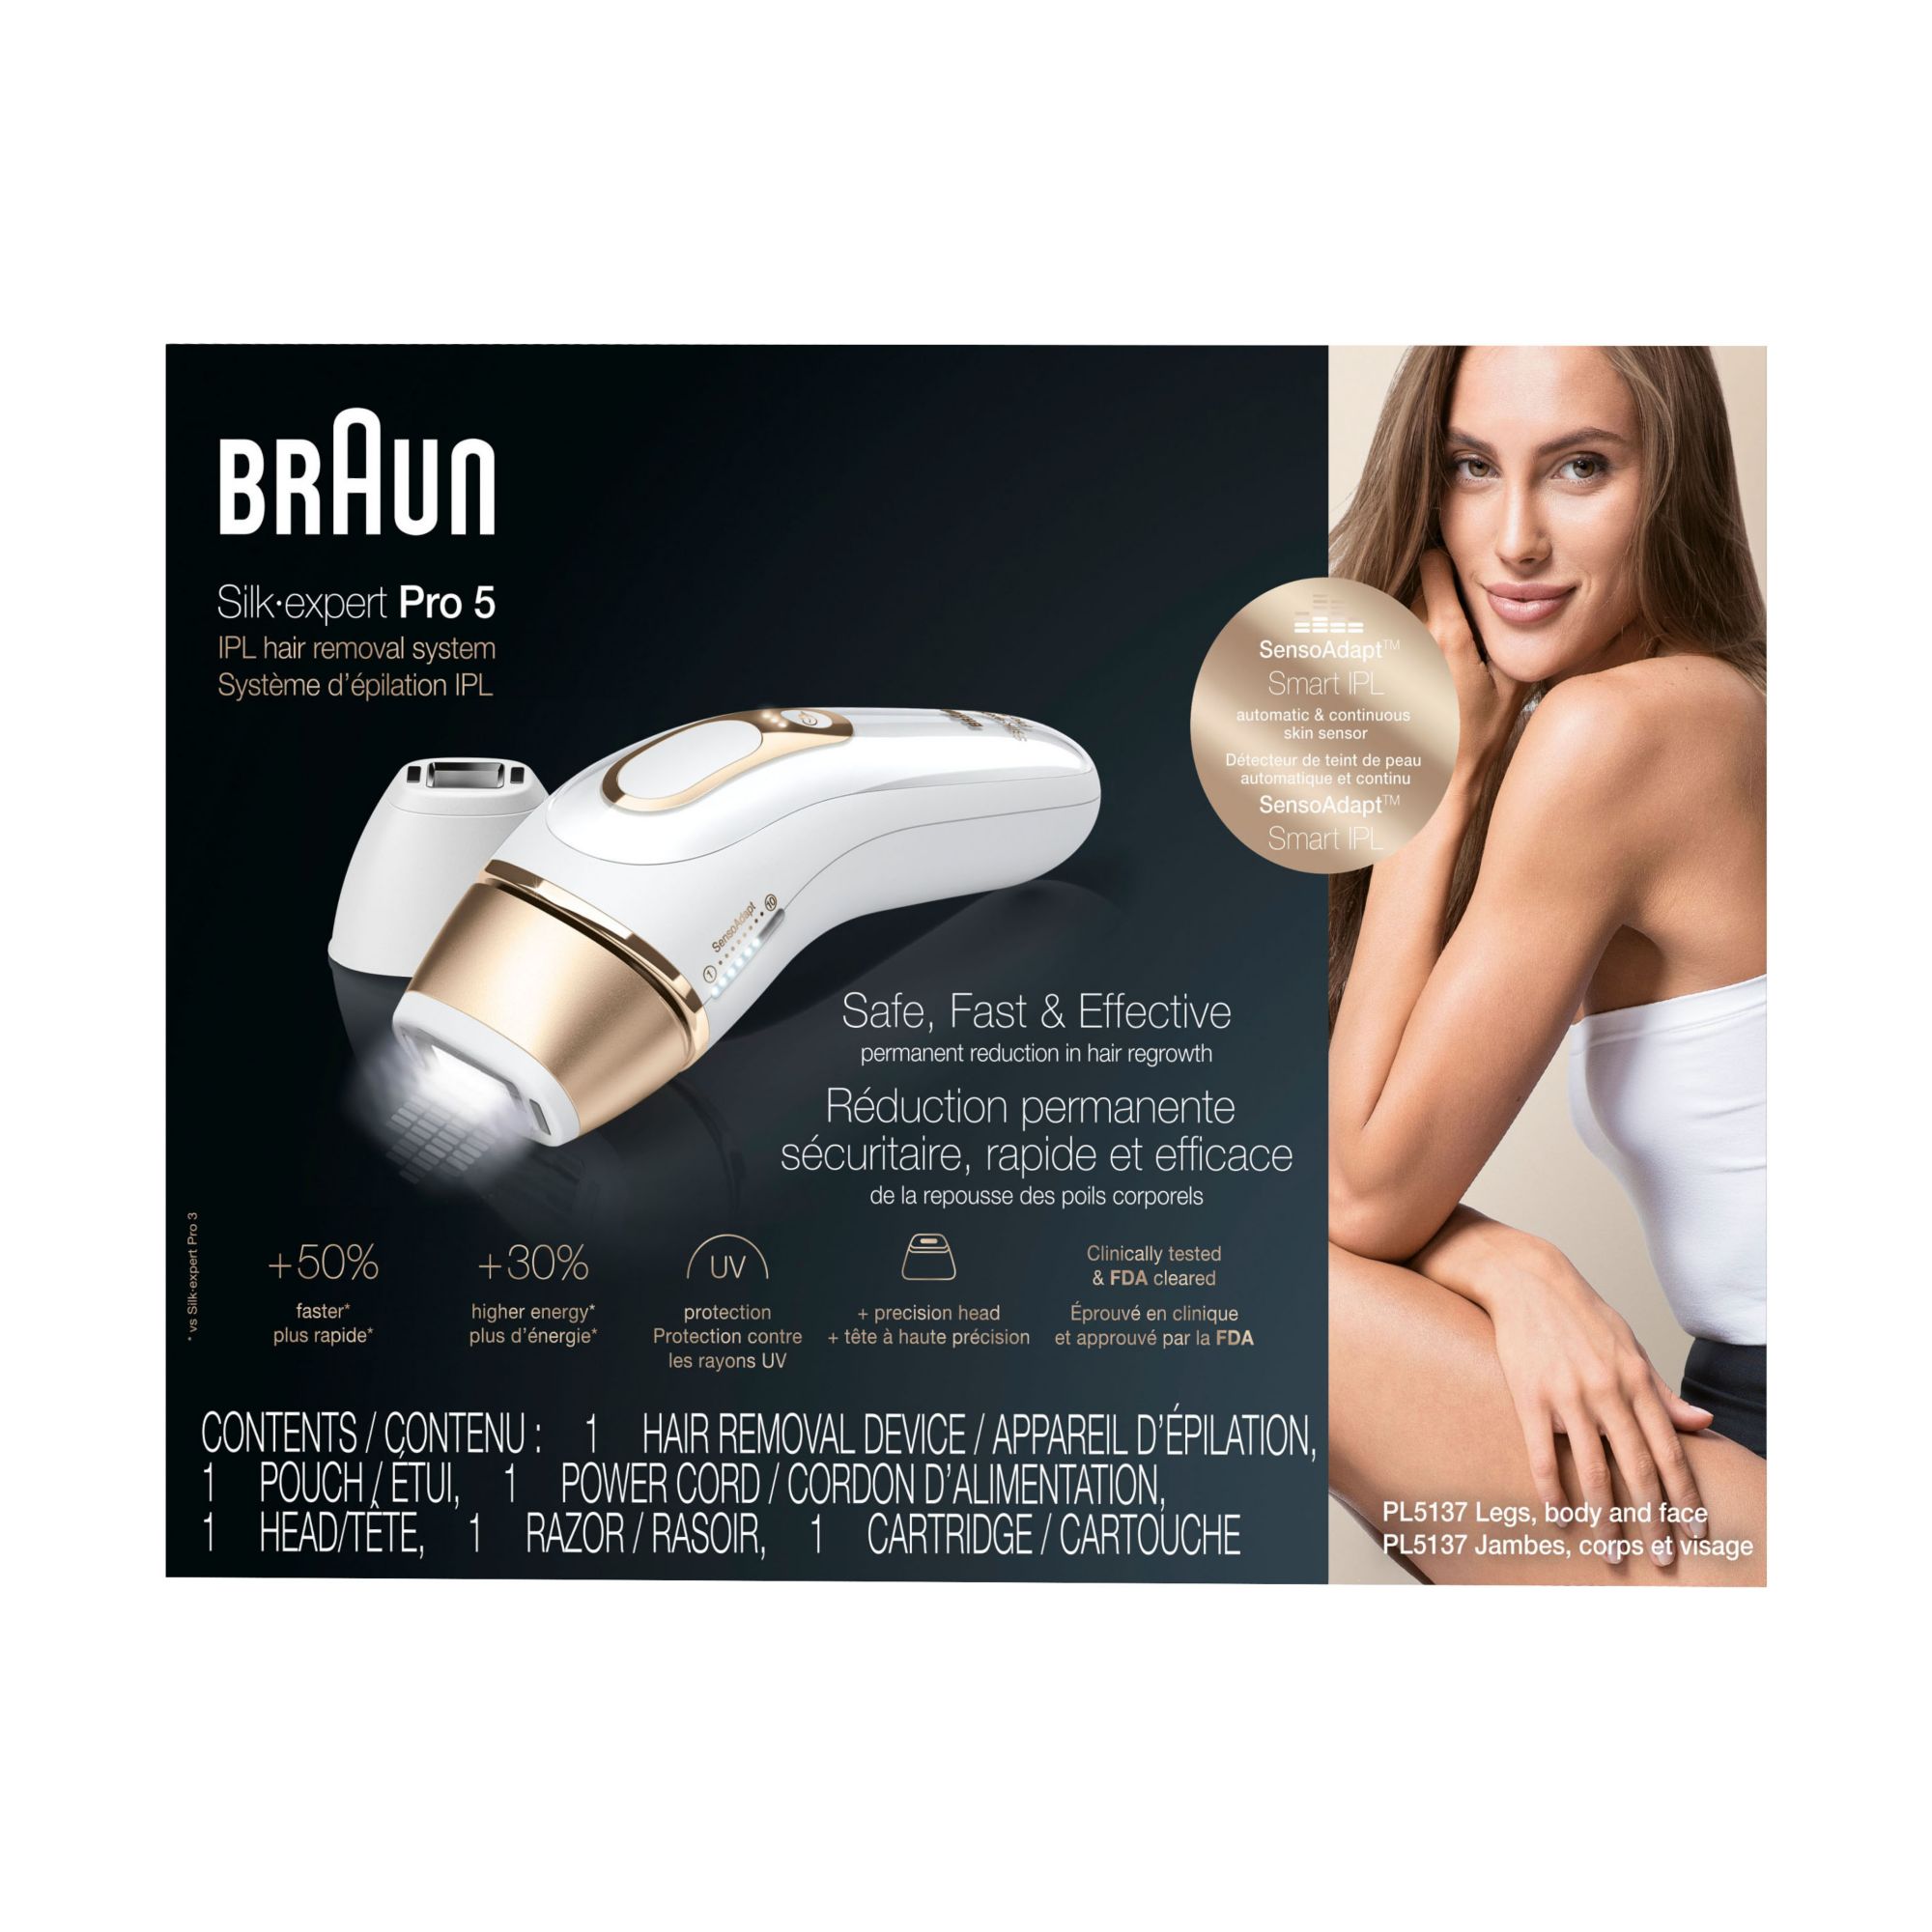 Braun Silk expert Pro 5 IPL Hair Removal System, PL5137 with Venus Swirl  Razor, FDA Cleared - White and Gold